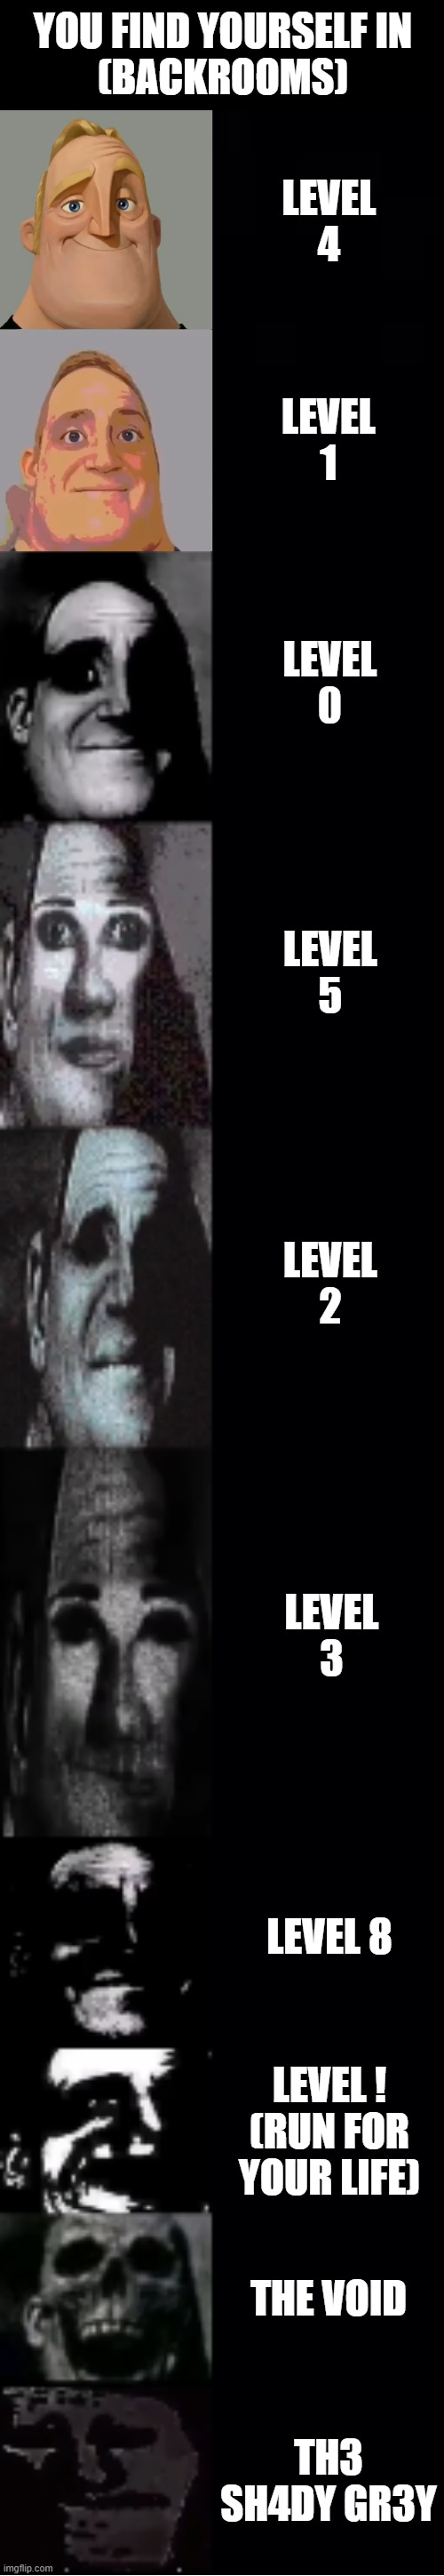 this level is level 2 or 3? : r/backrooms